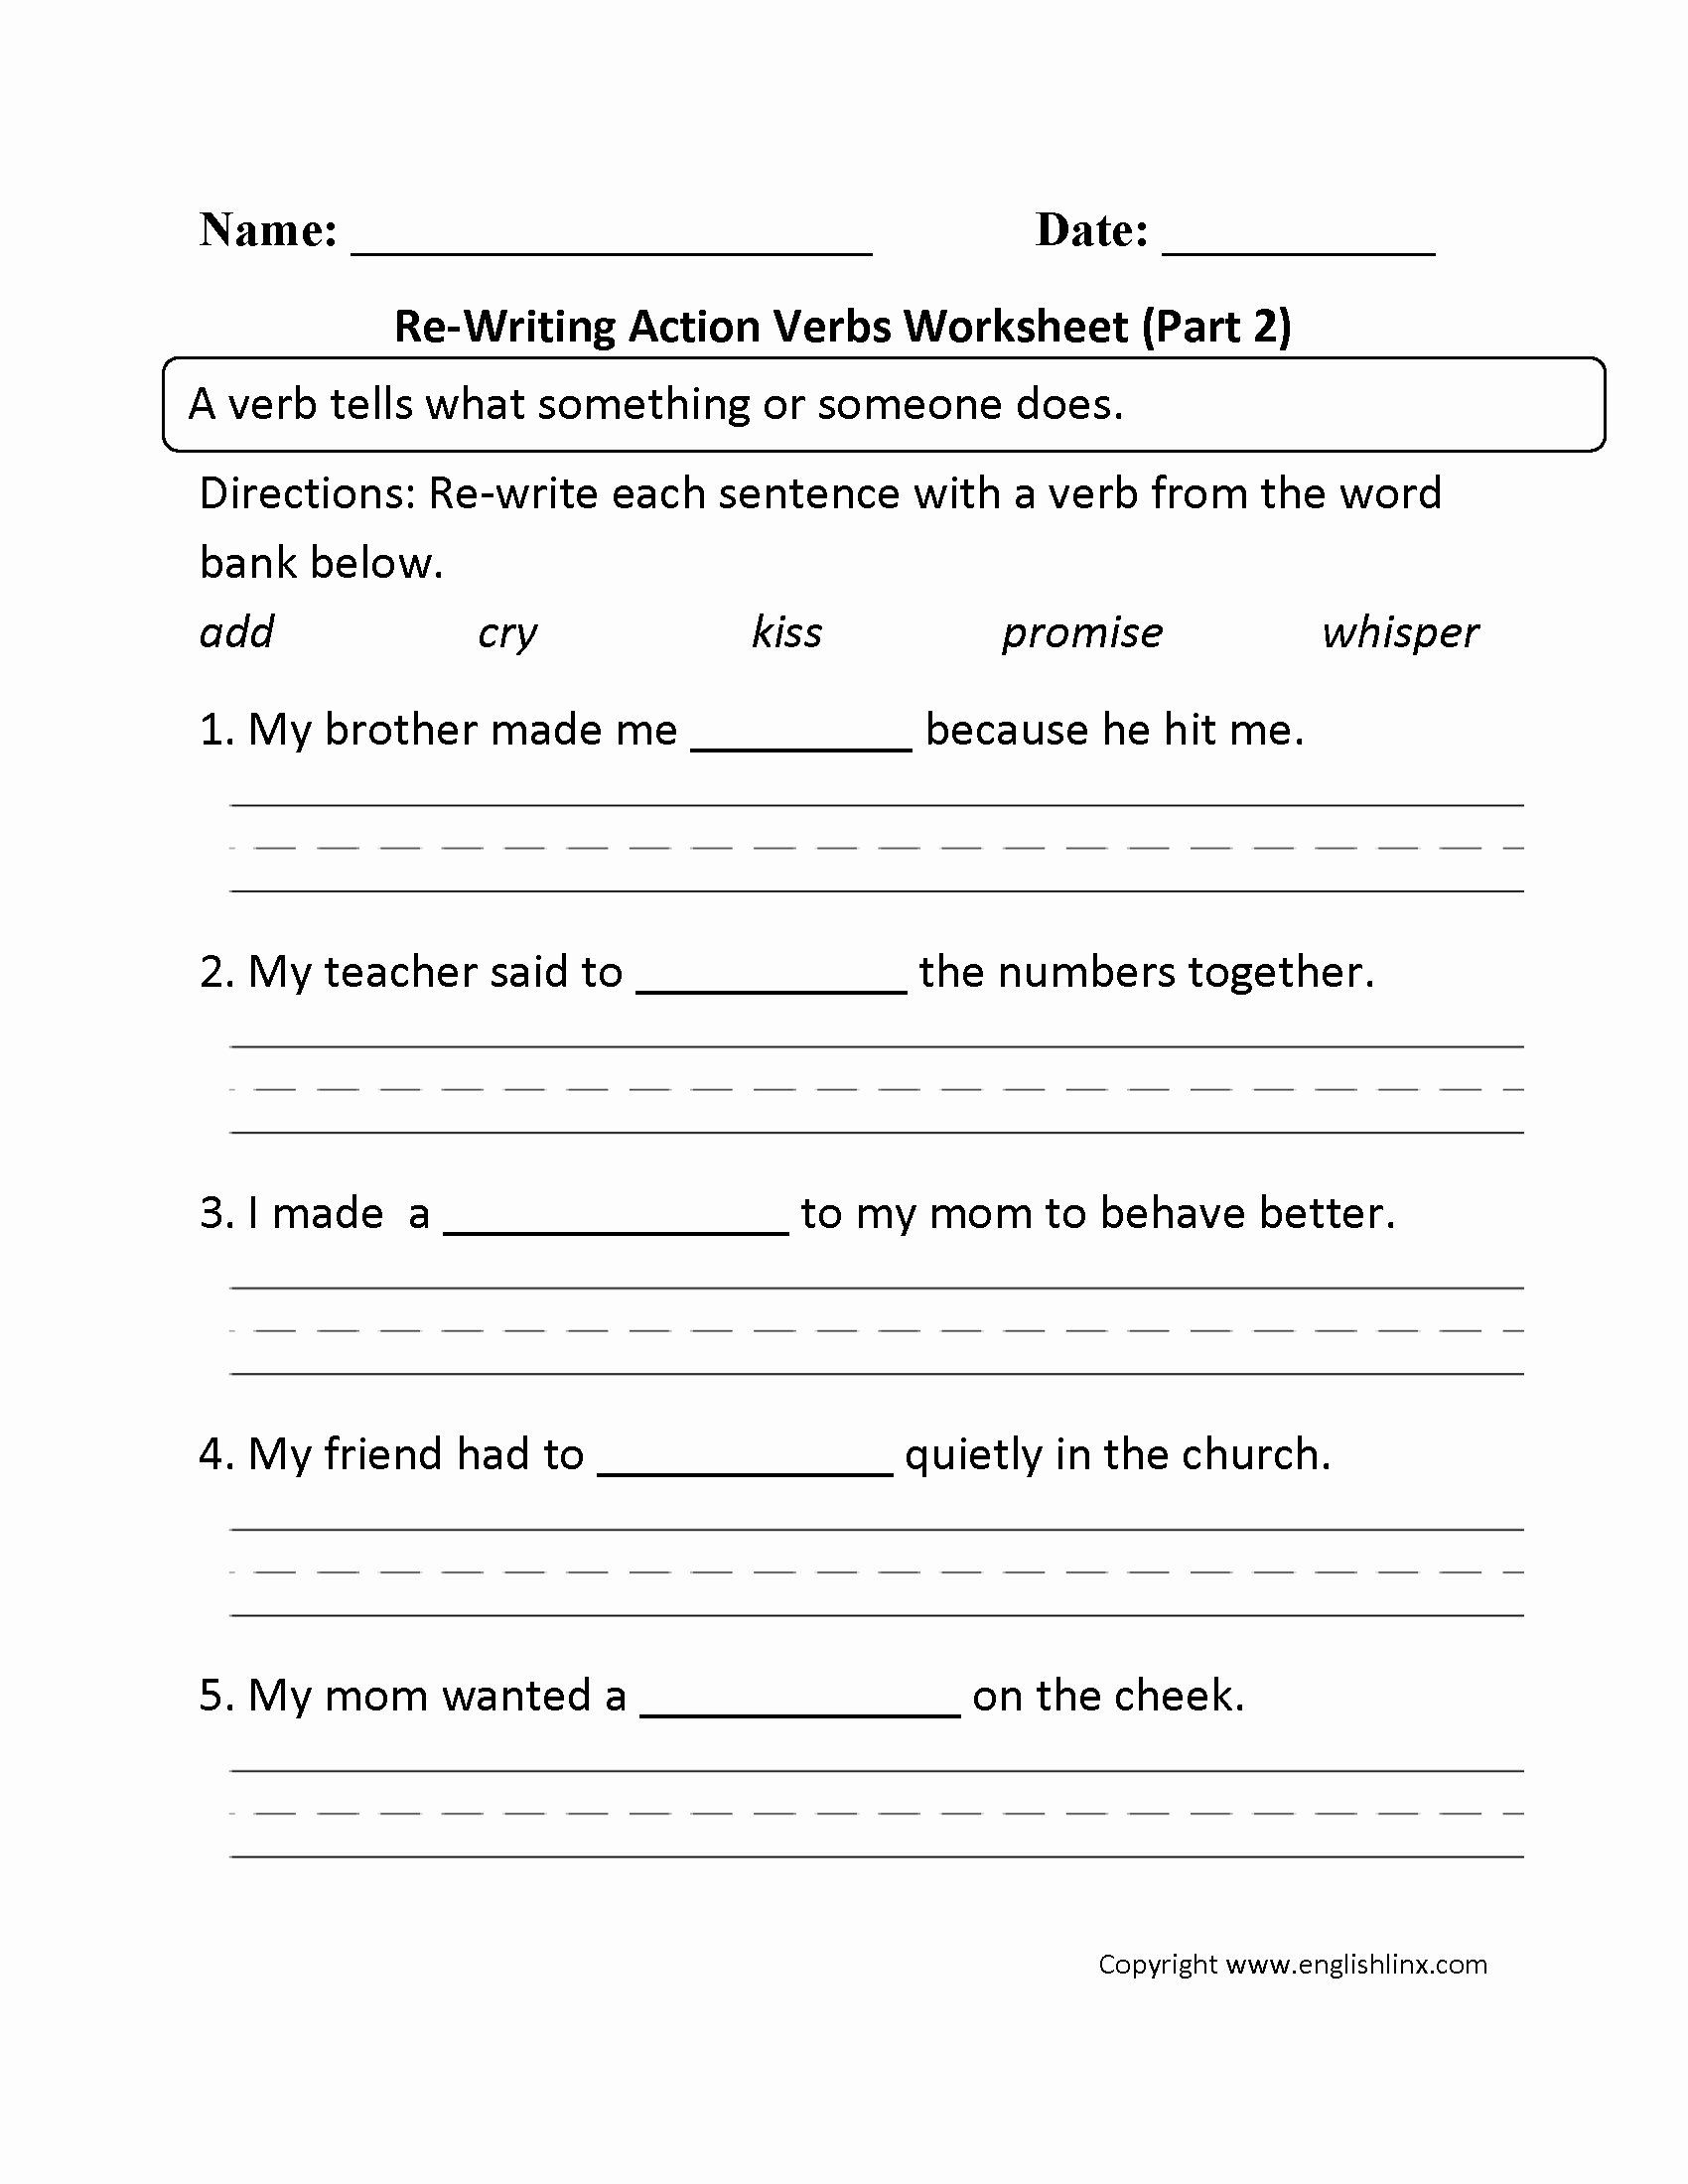 English Worksheet for Grade 2 Best Of Re Writing Action Verbs Worksheet Part 2 S